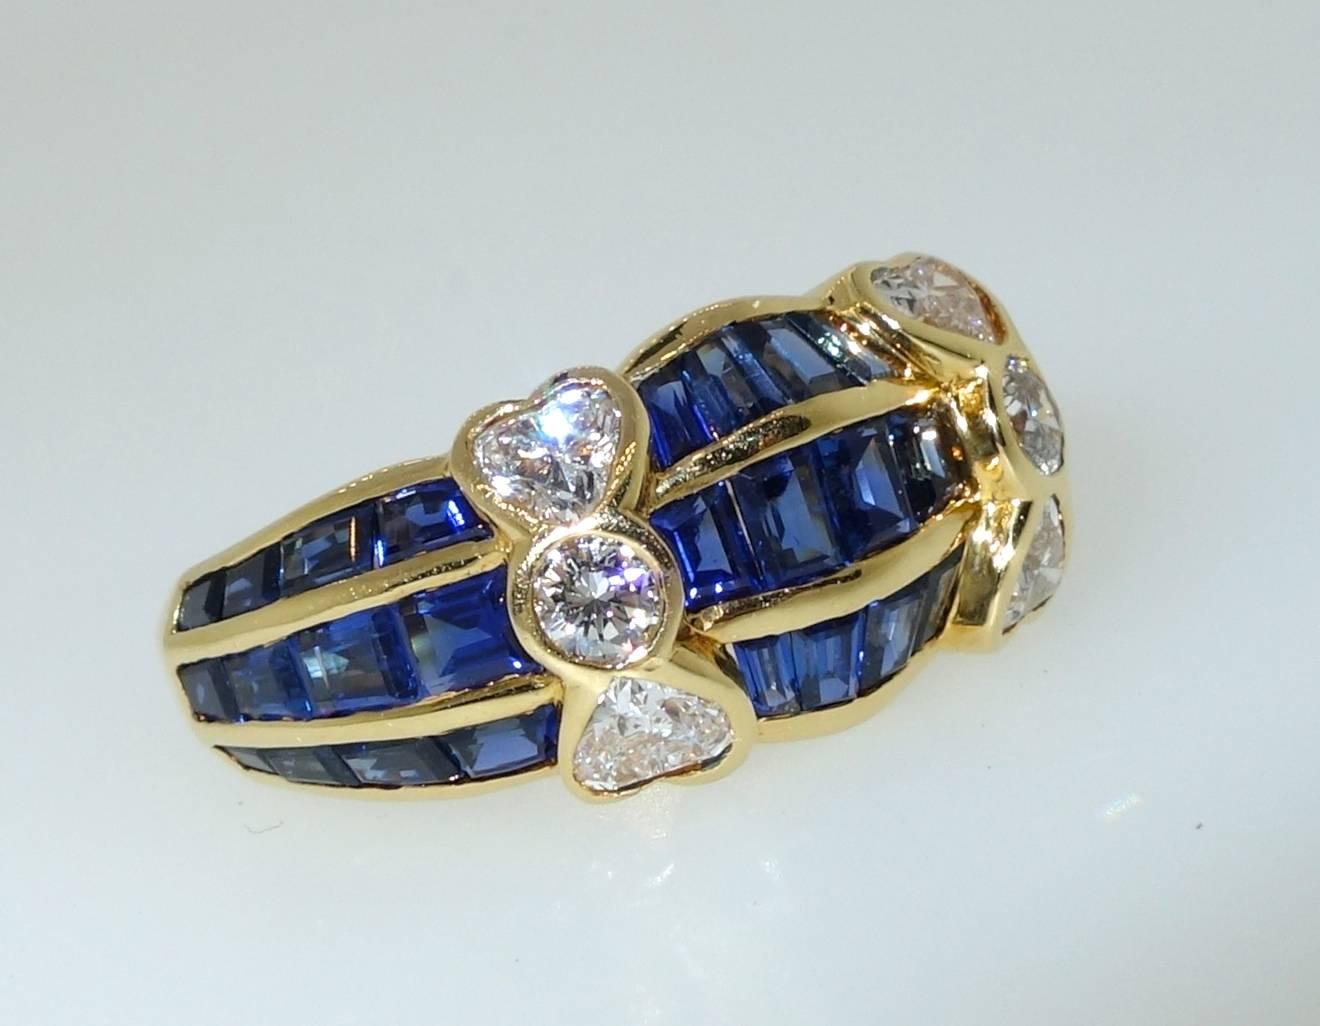 Contemporary Van Cleef & Arpels Diamond and Sapphire Ring 